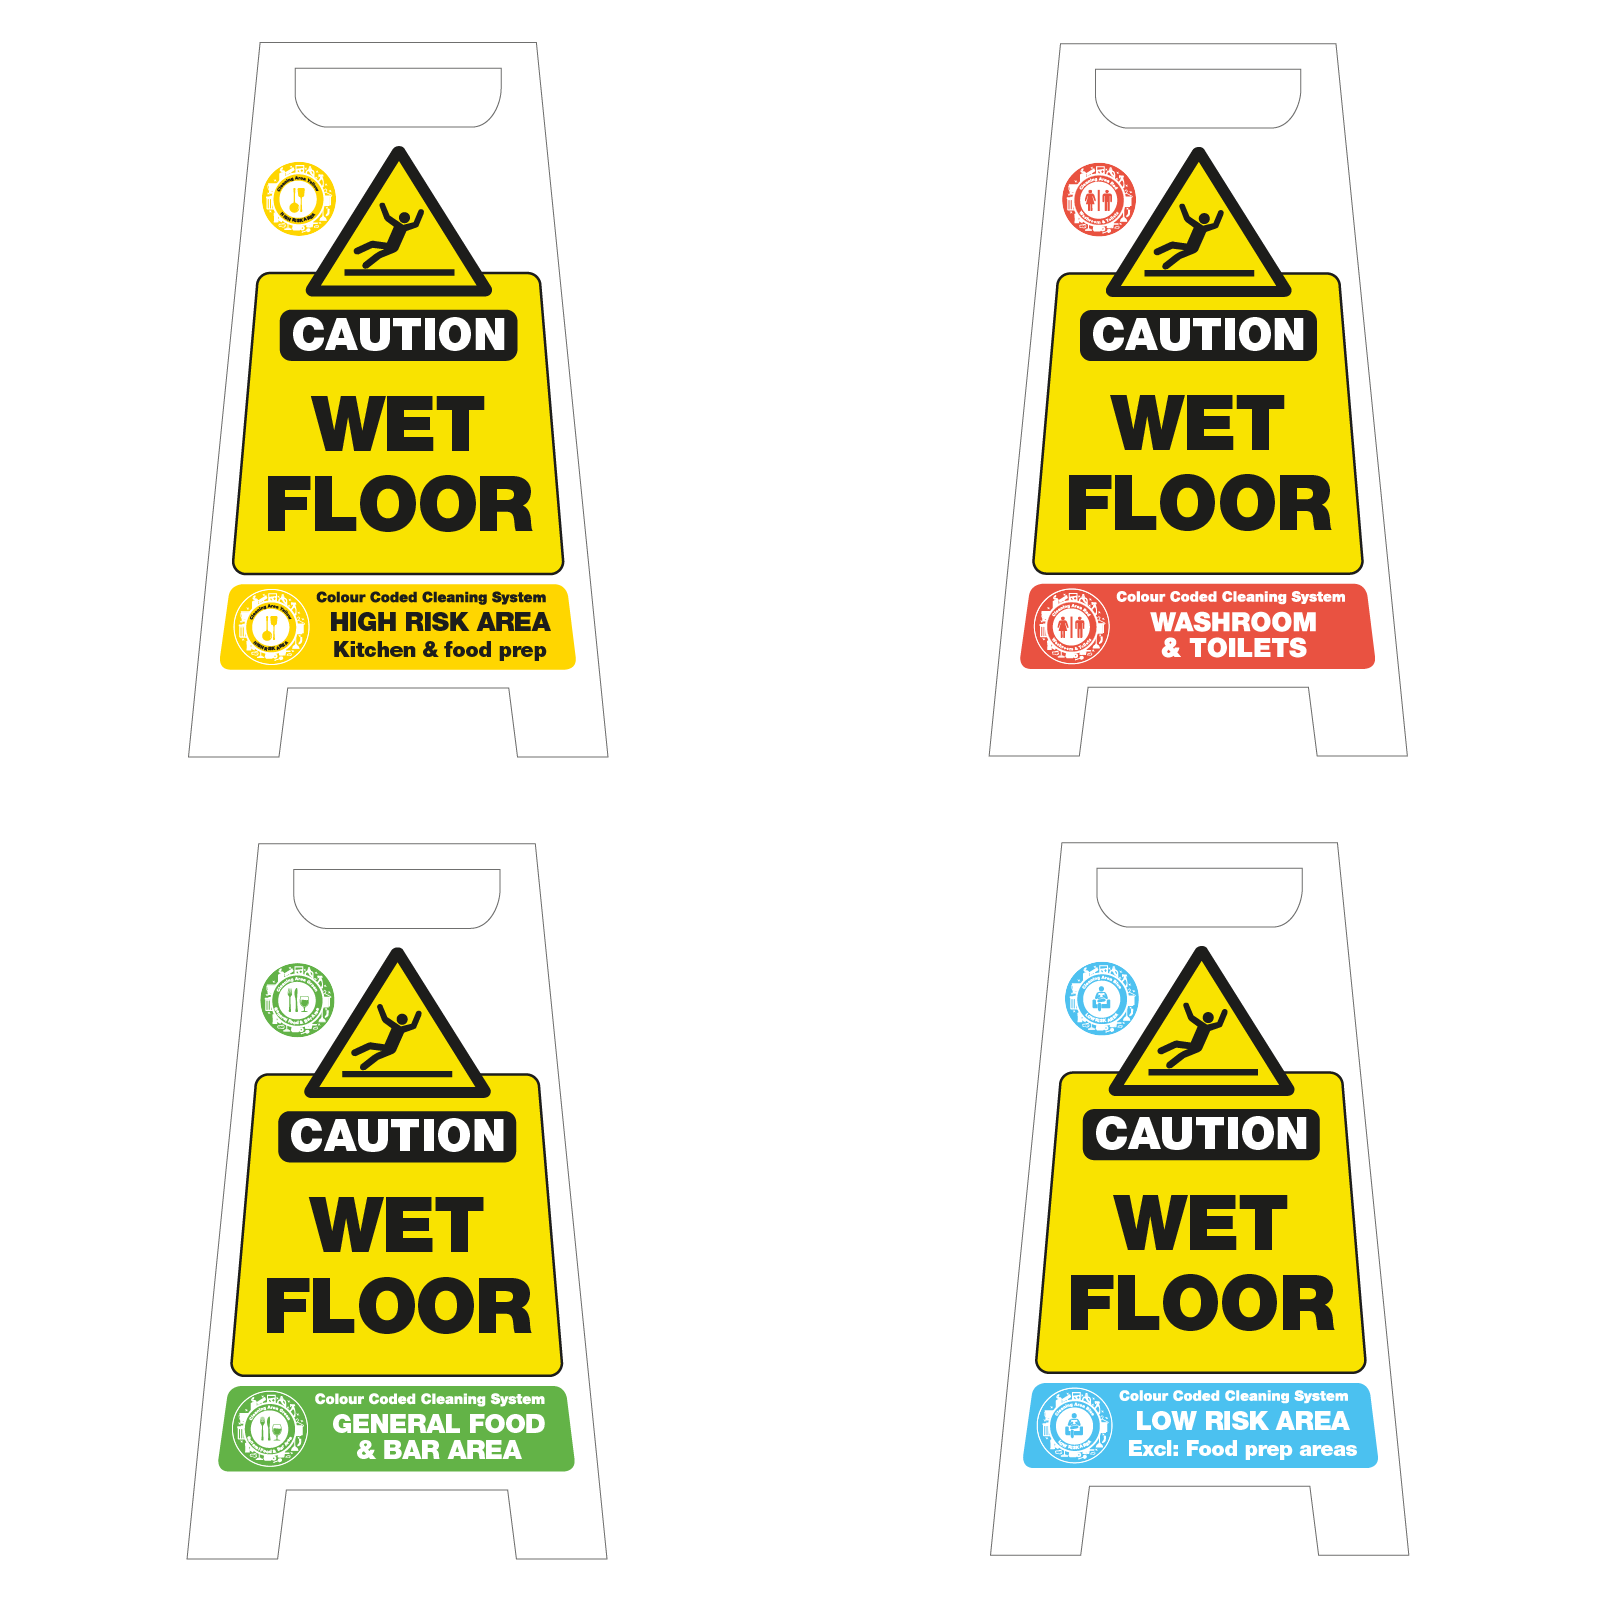 Colour Coded Cleaning System Wet Floor Stands